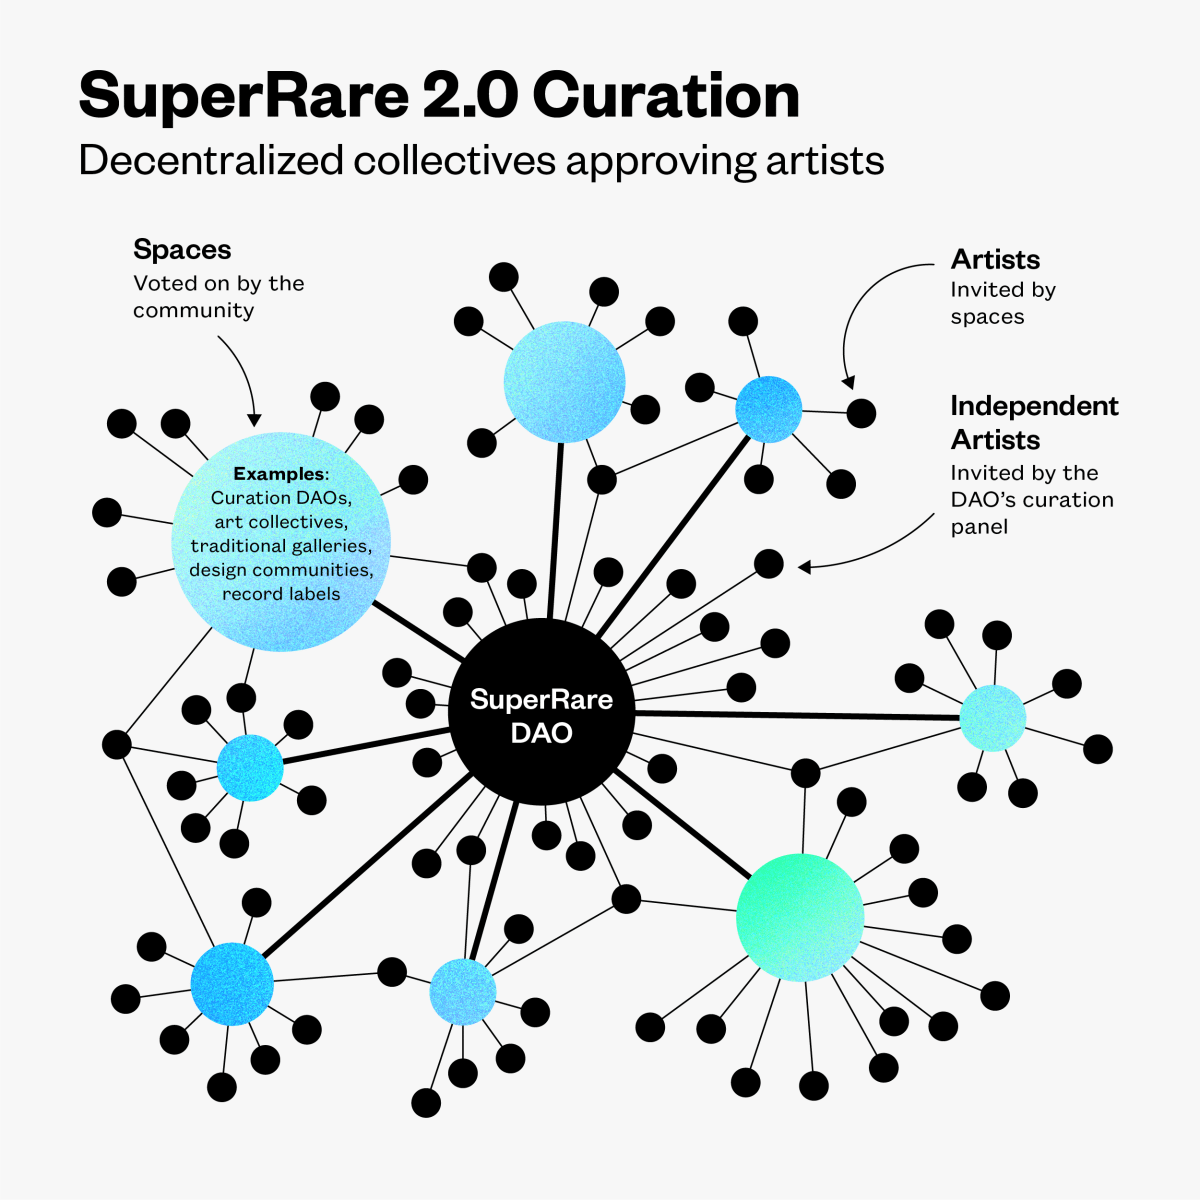 SuperRare 2.0 curation flow chart